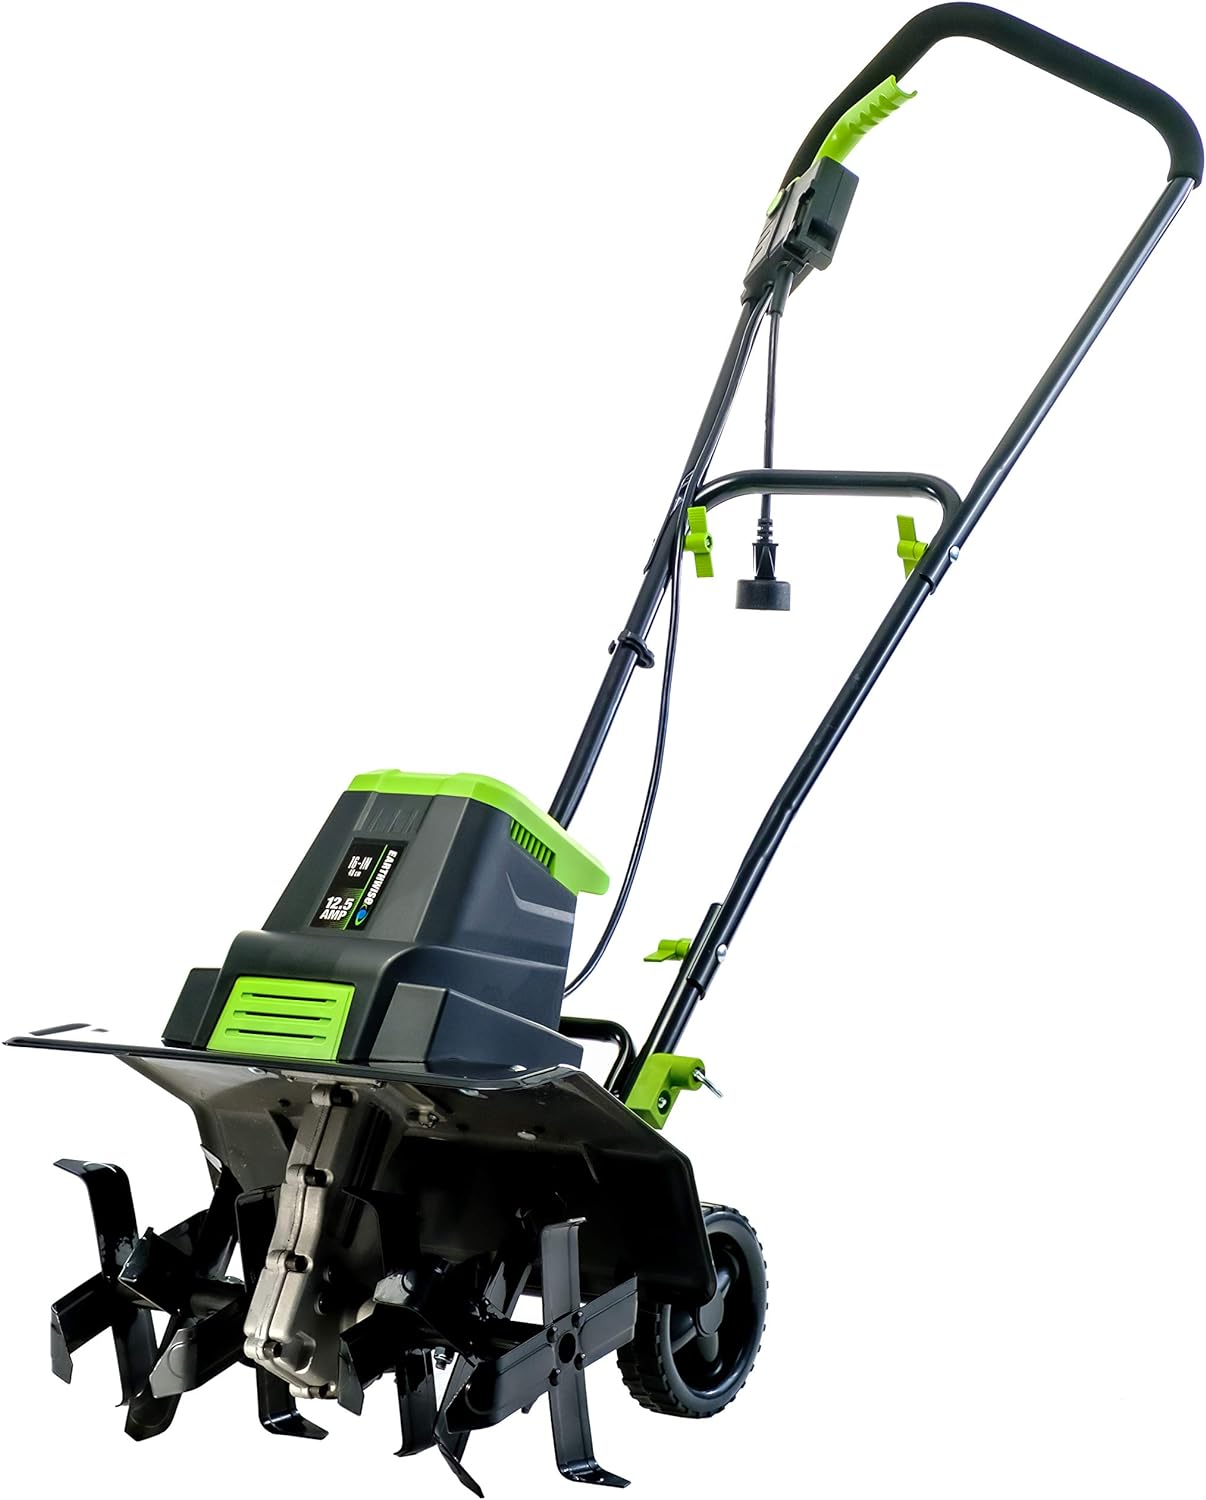 Earthwise TC70125 12.5-Amp 16-Inch Corded Electric Tiller/Cultivator, Green